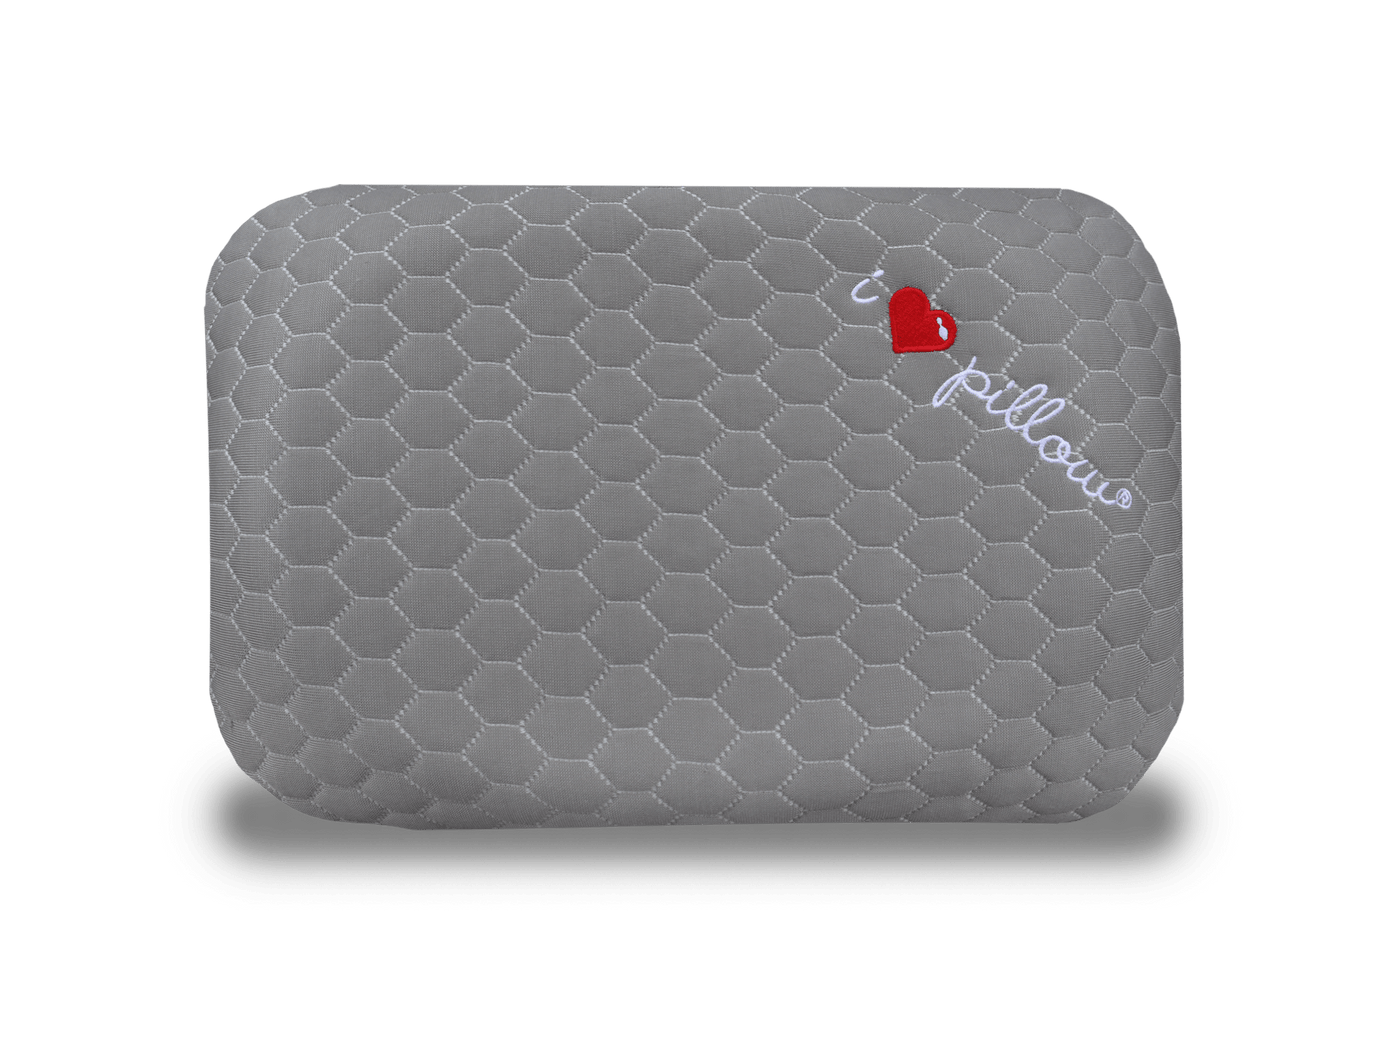 I Love Pillow Pillows Out Cold Graphene Travel Pillow & Blanket Bundle